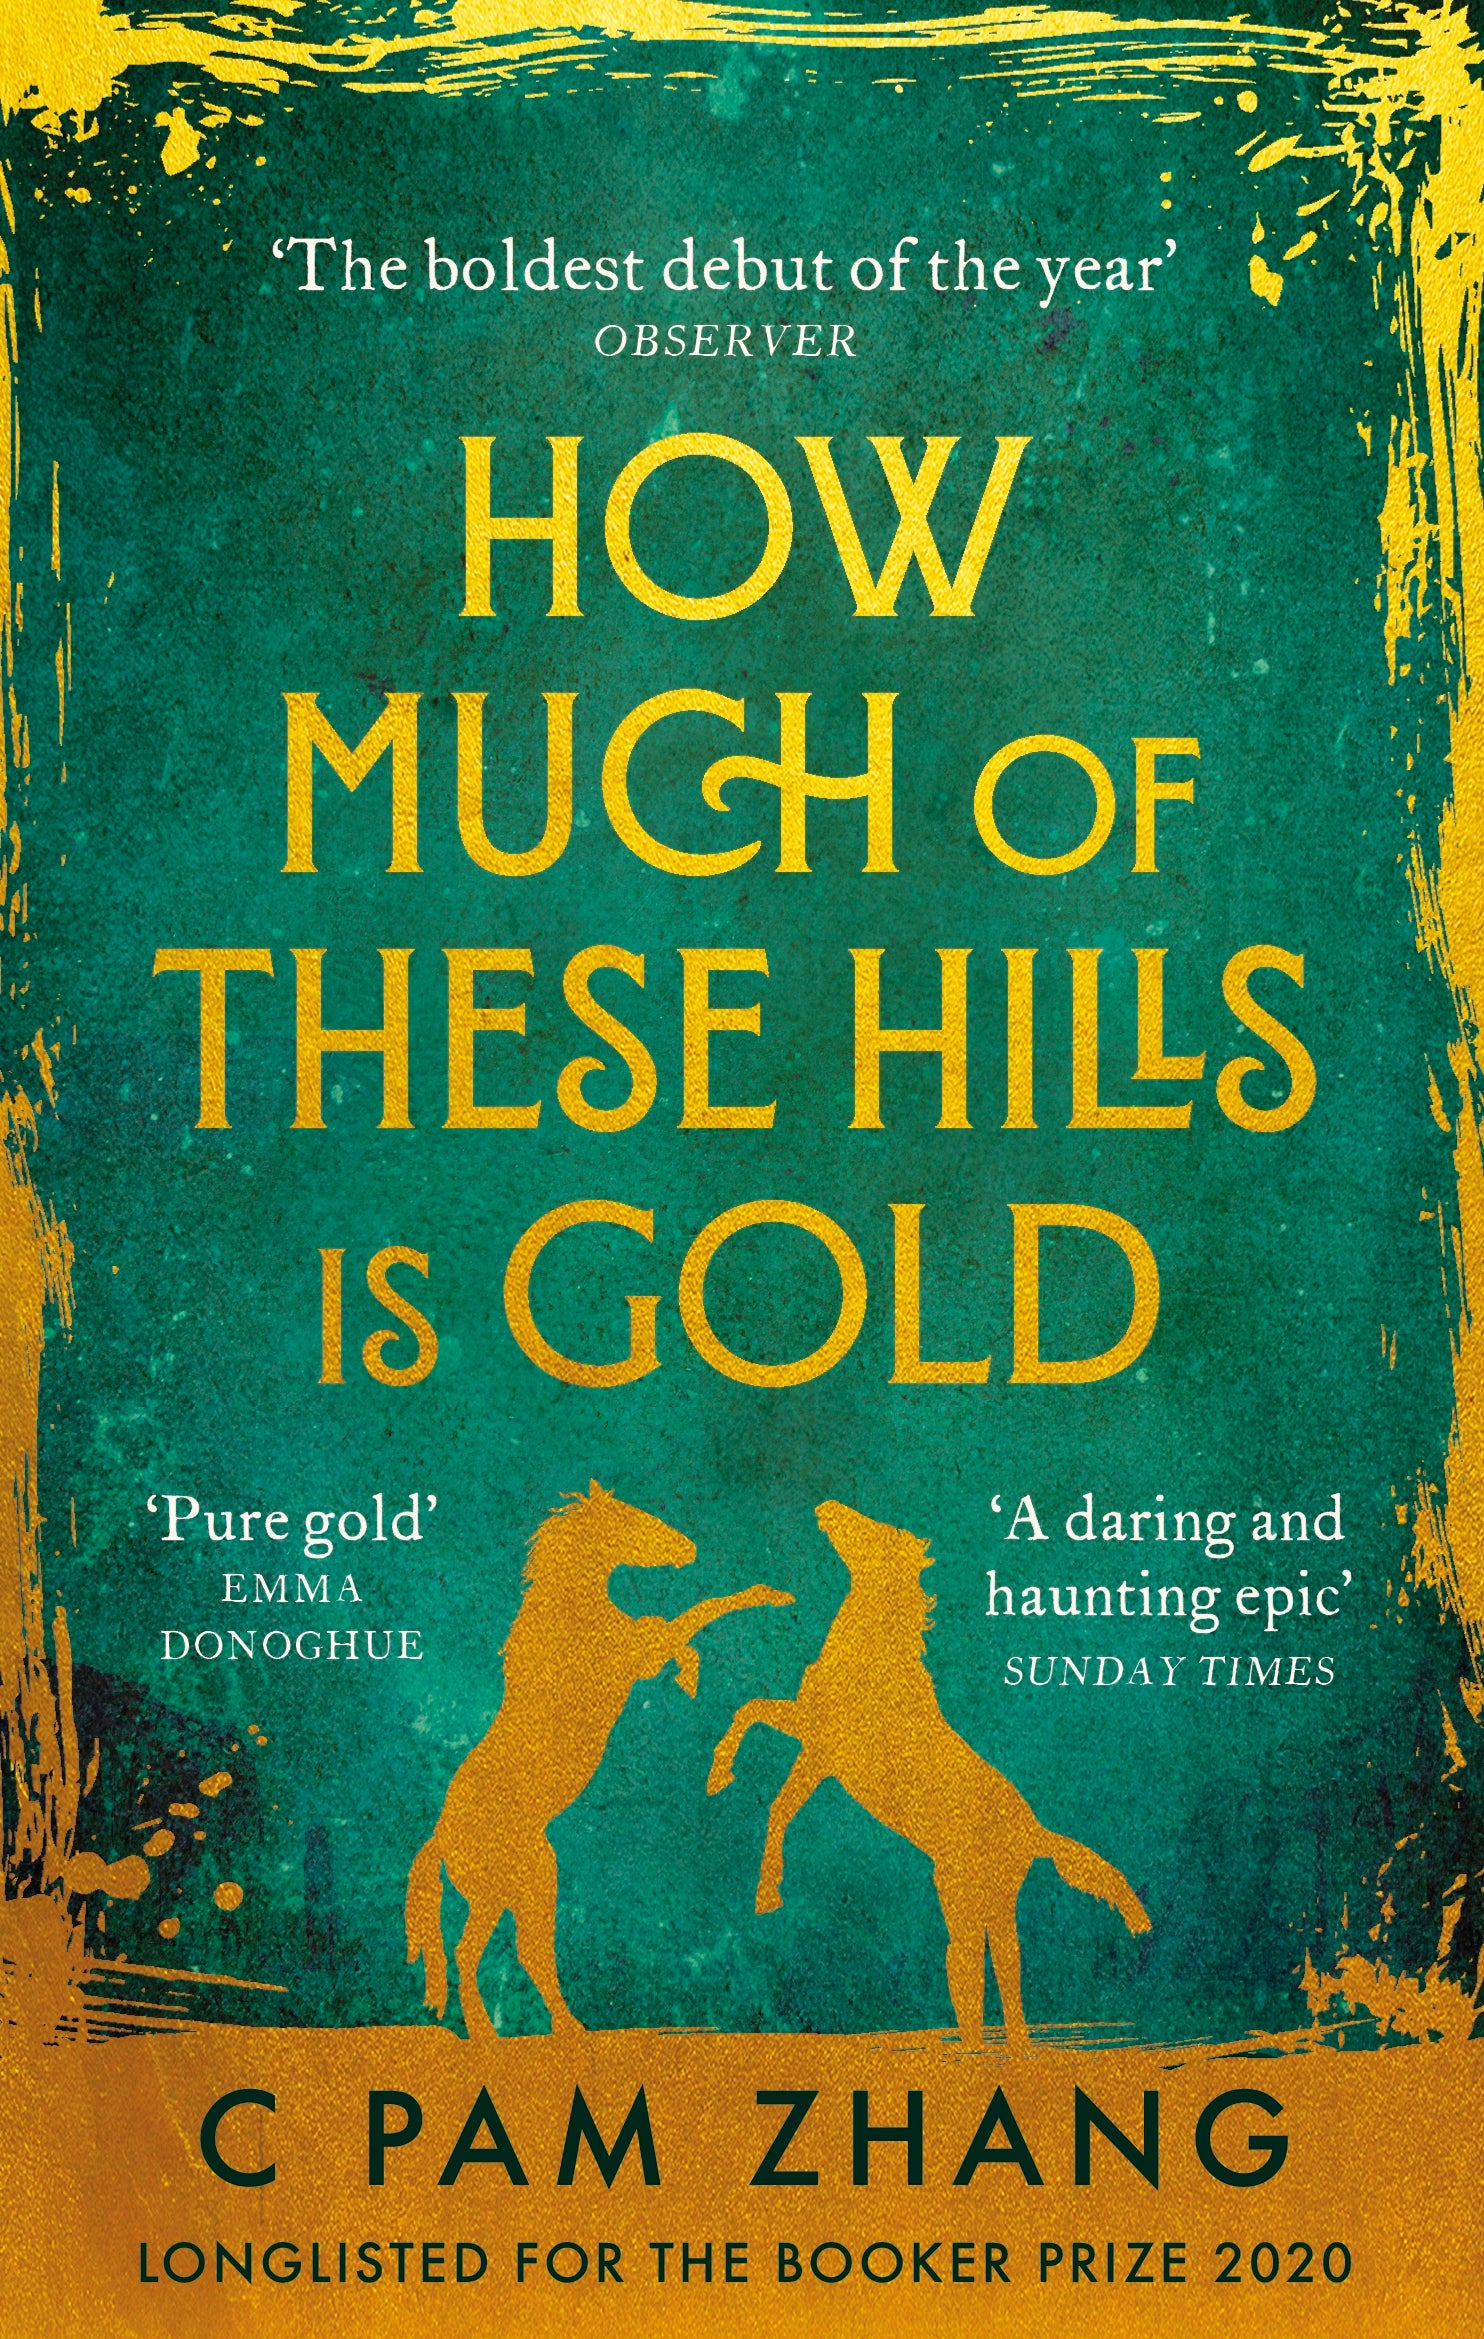 How Much of These Hills is Gold by C Pam Zhang